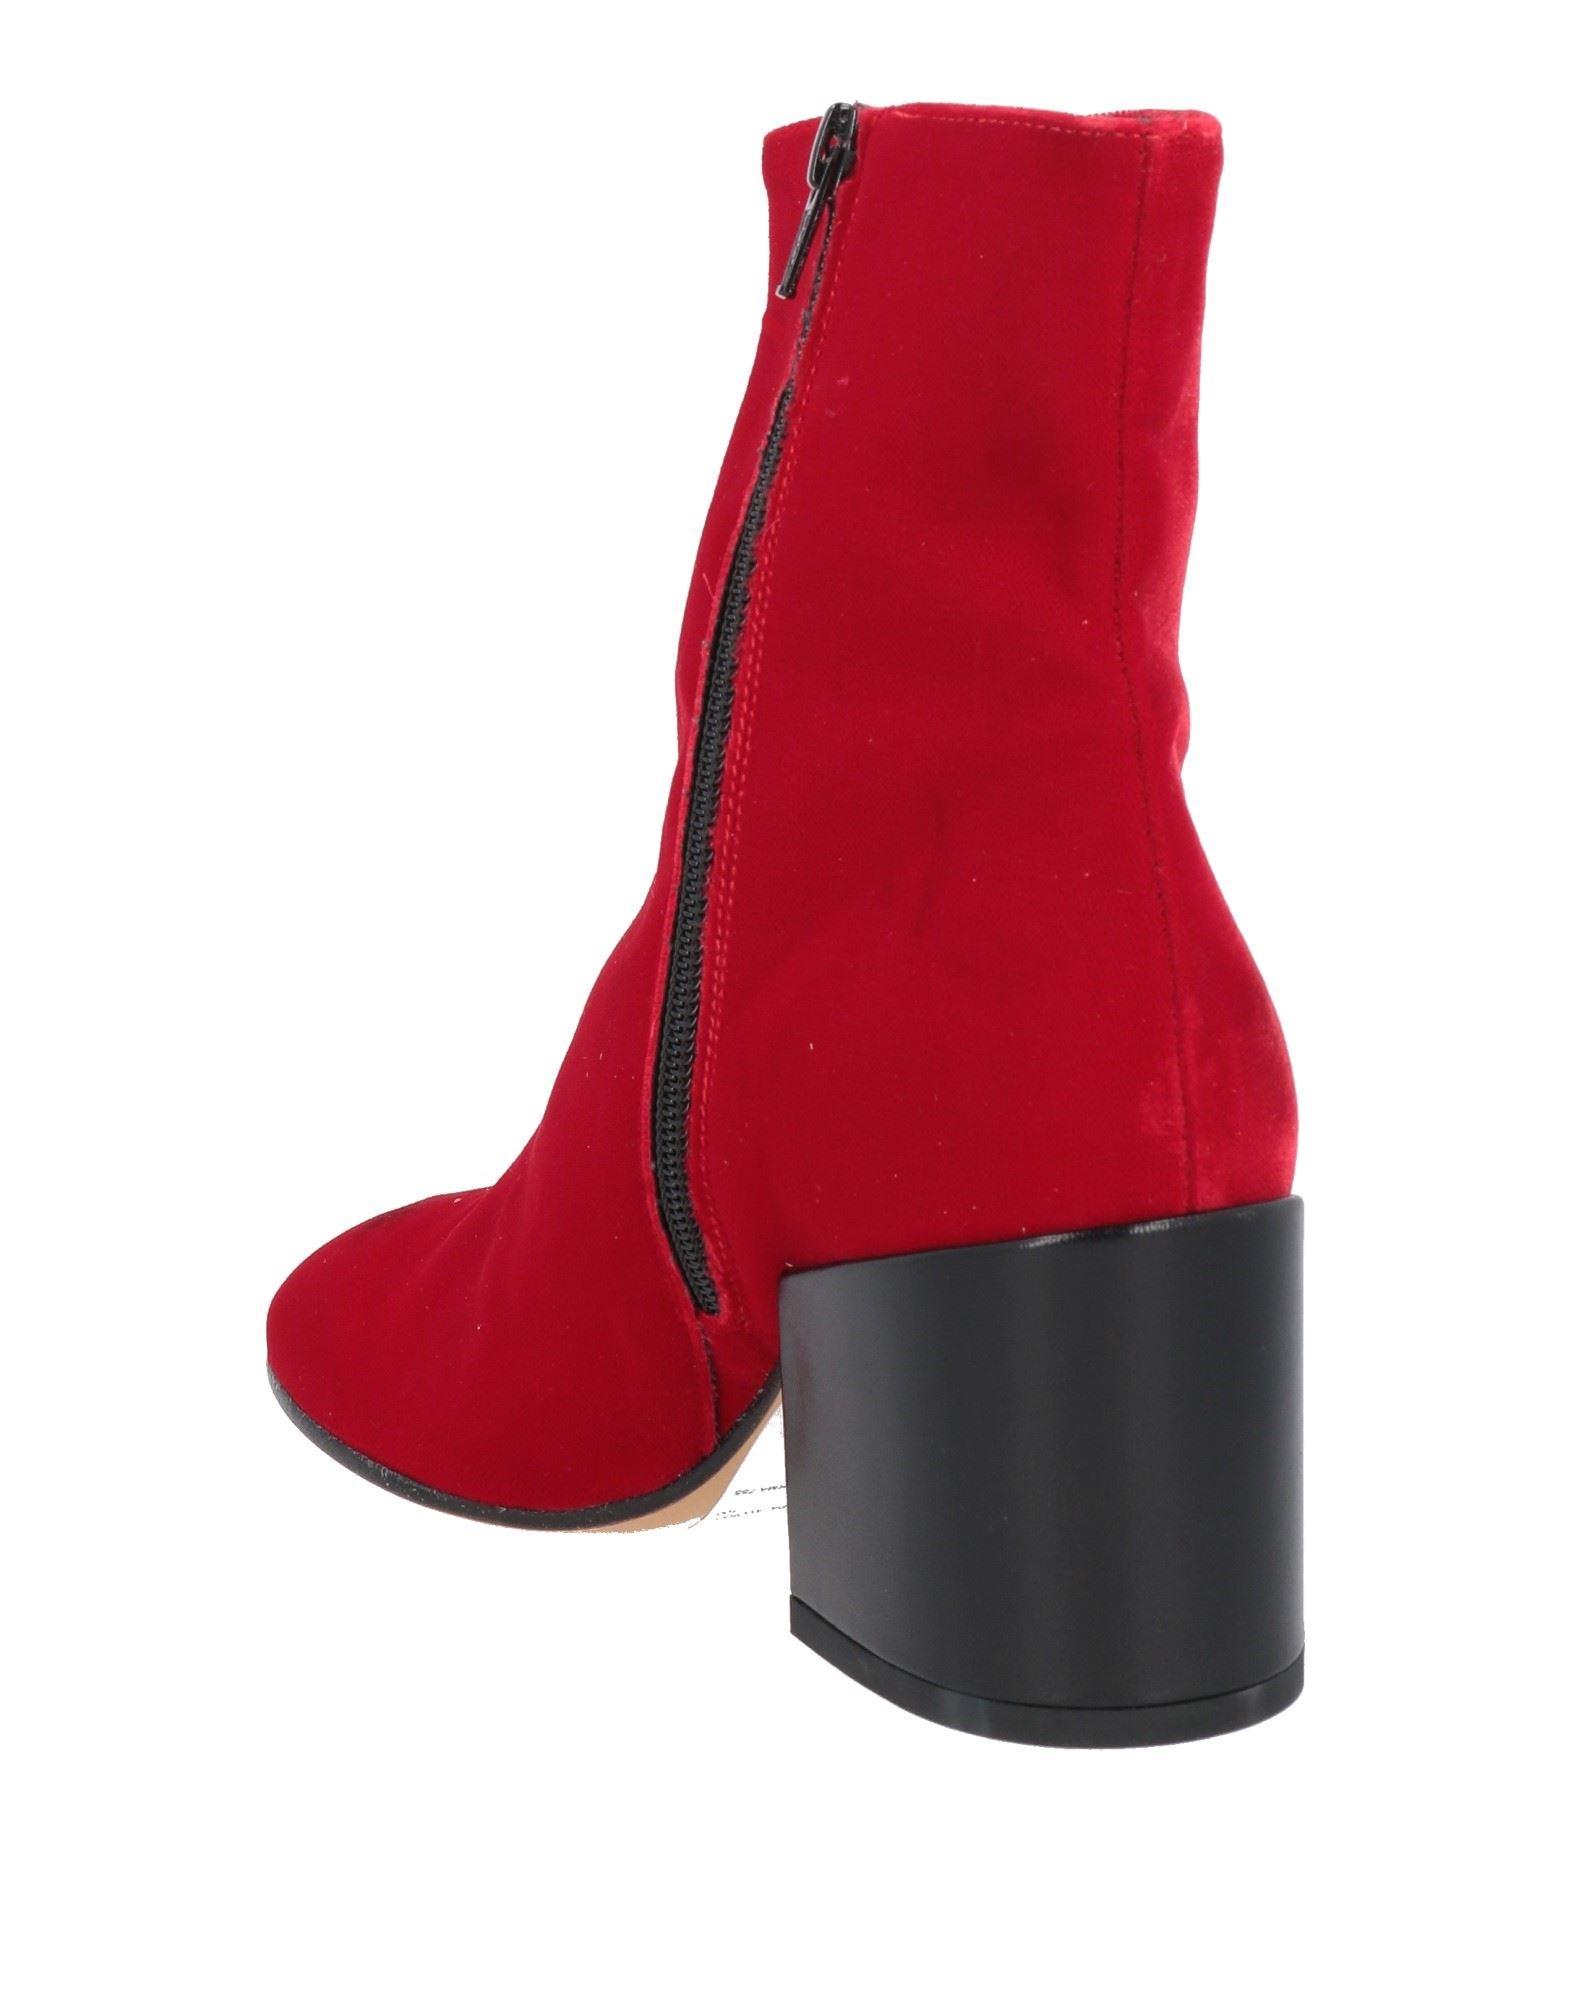 Fabio Rusconi Ankle Boots in Red | Lyst